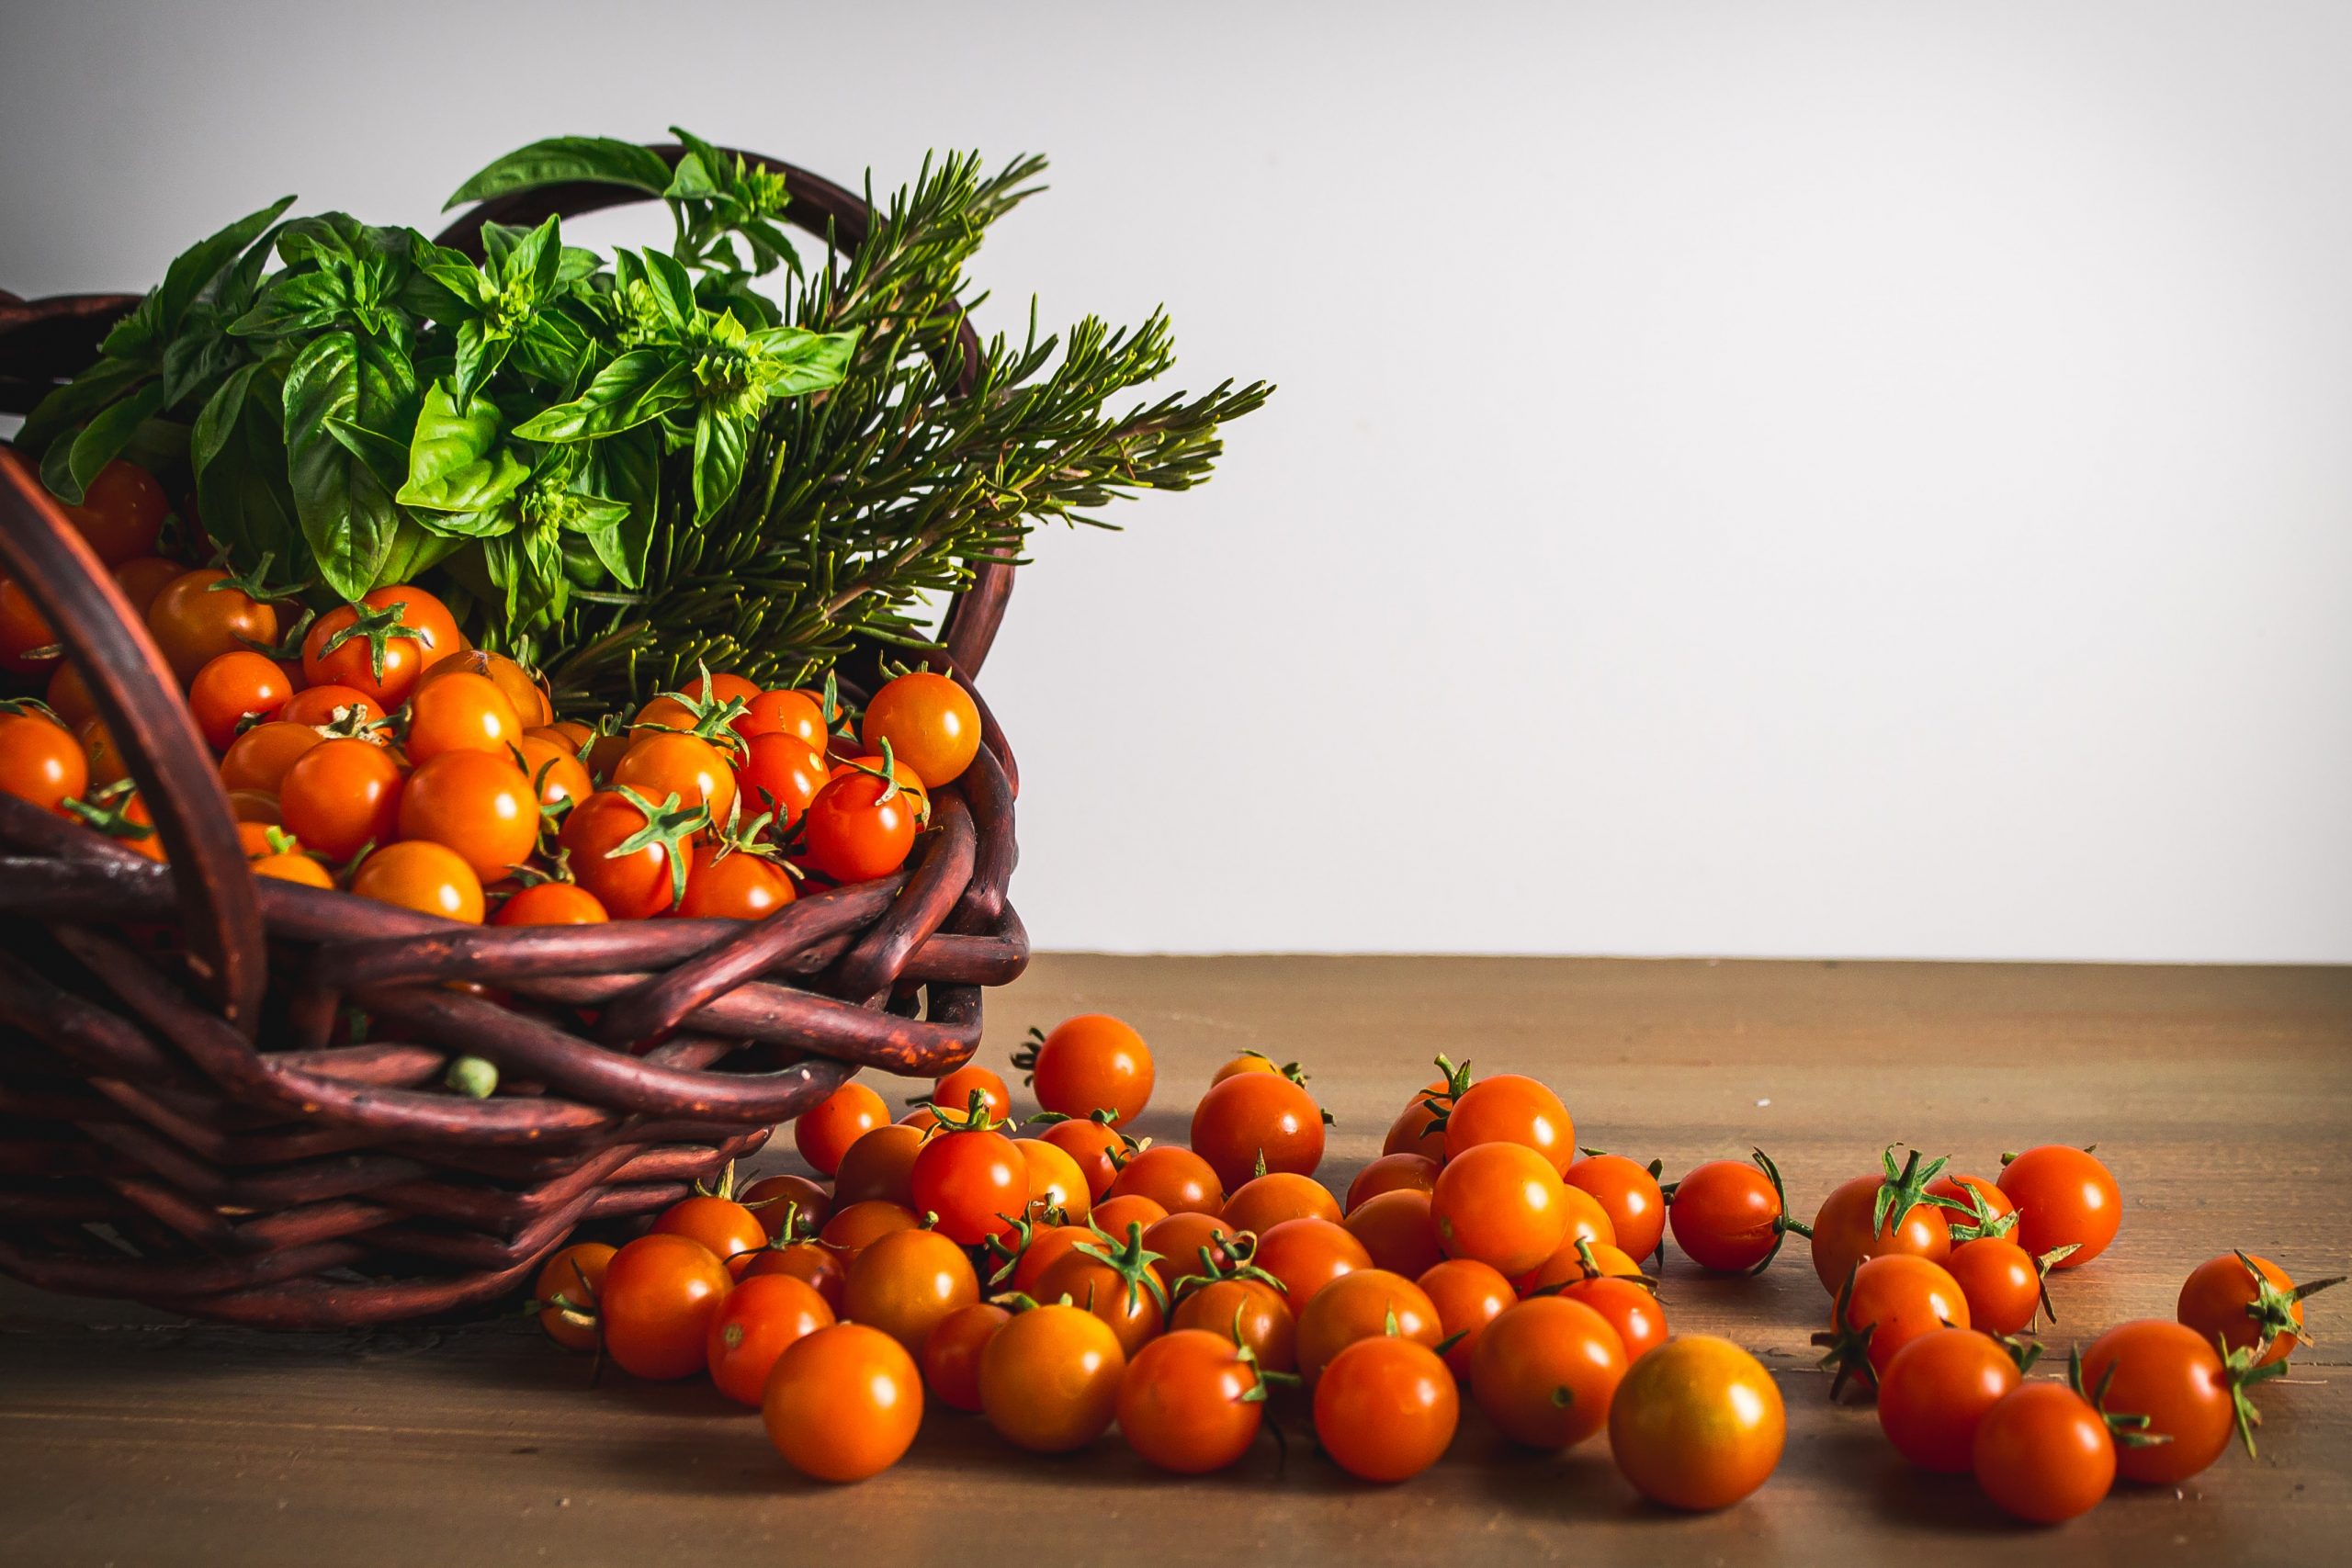 Are Grafted Tomatoes Really Worth The Money?